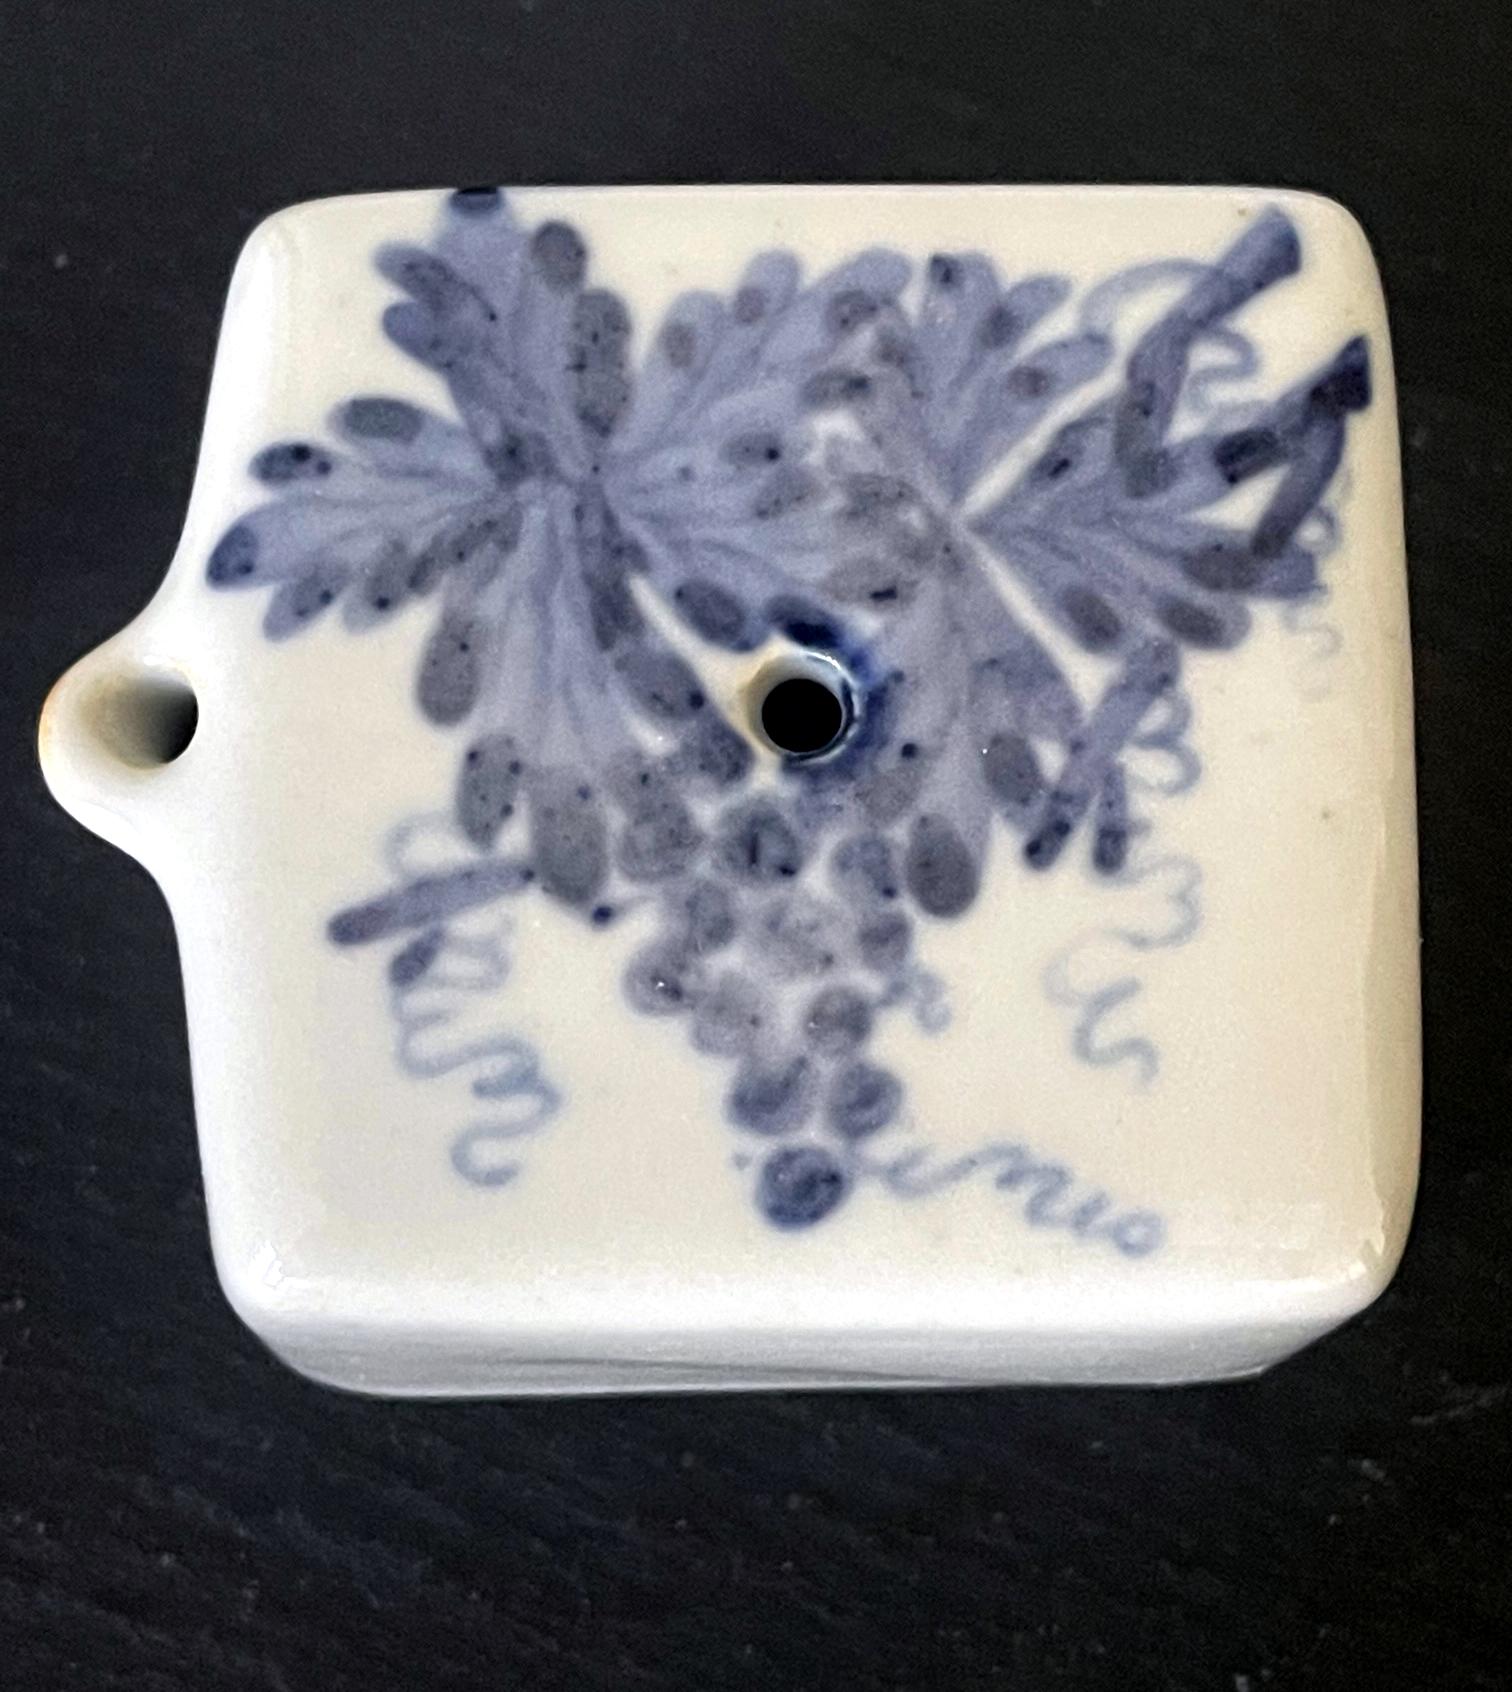 A small Korean ceramic water dropper in square form circa 19th century late Joseon Dynasty. It features an underglaze blue painting of a full cluster of grapes with vines and leaves on white background. A central small opening is for refill and a